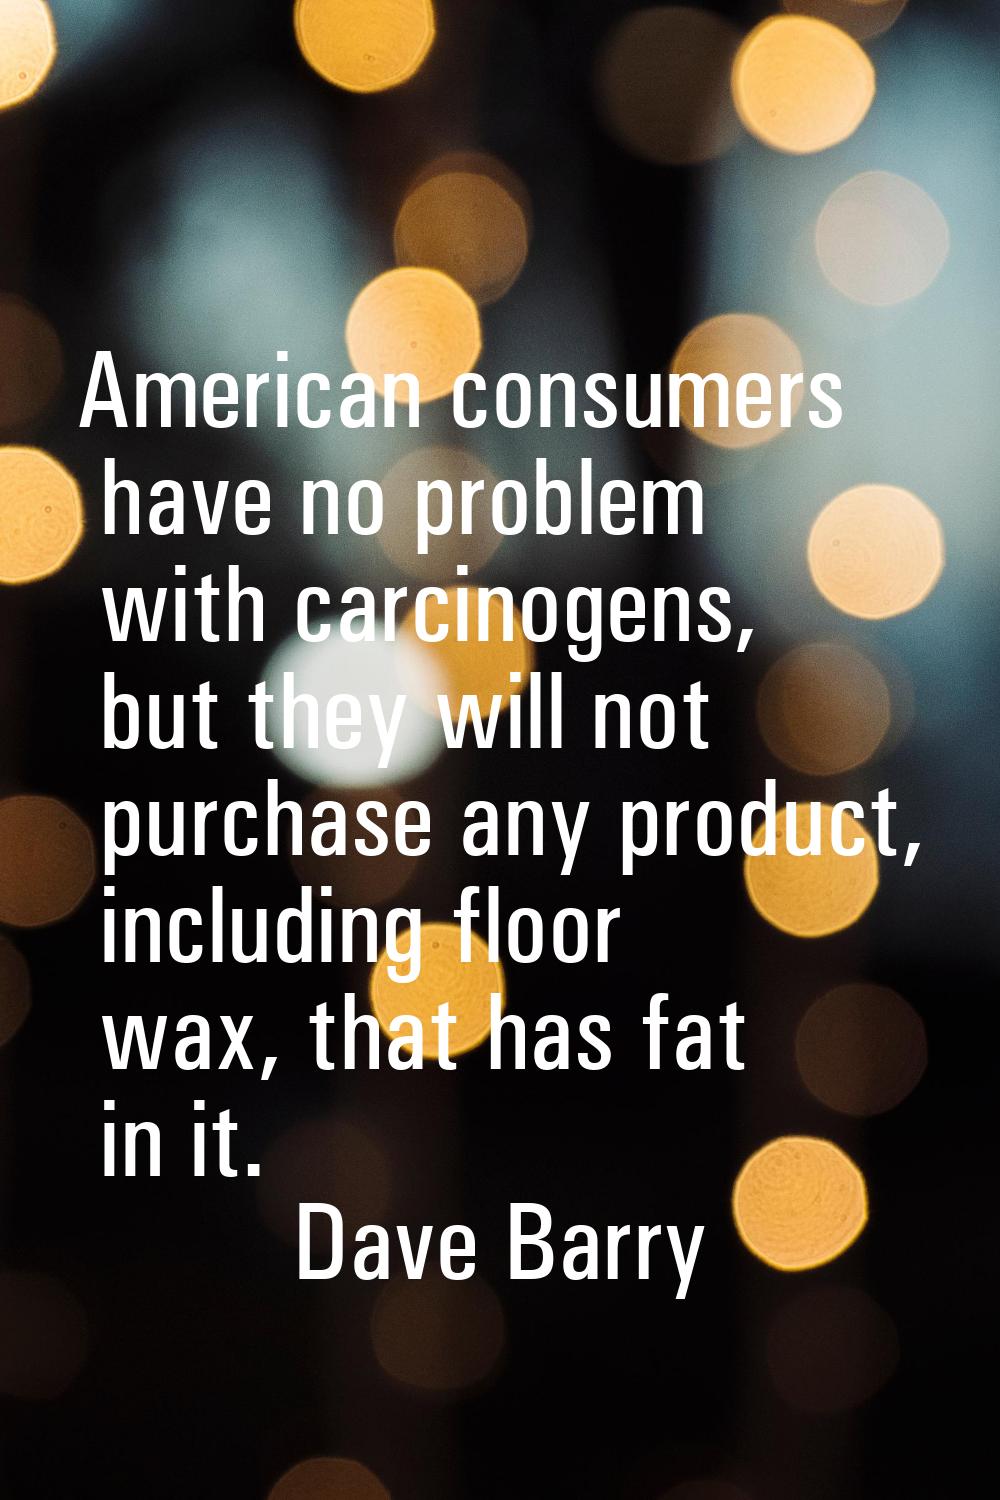 American consumers have no problem with carcinogens, but they will not purchase any product, includ